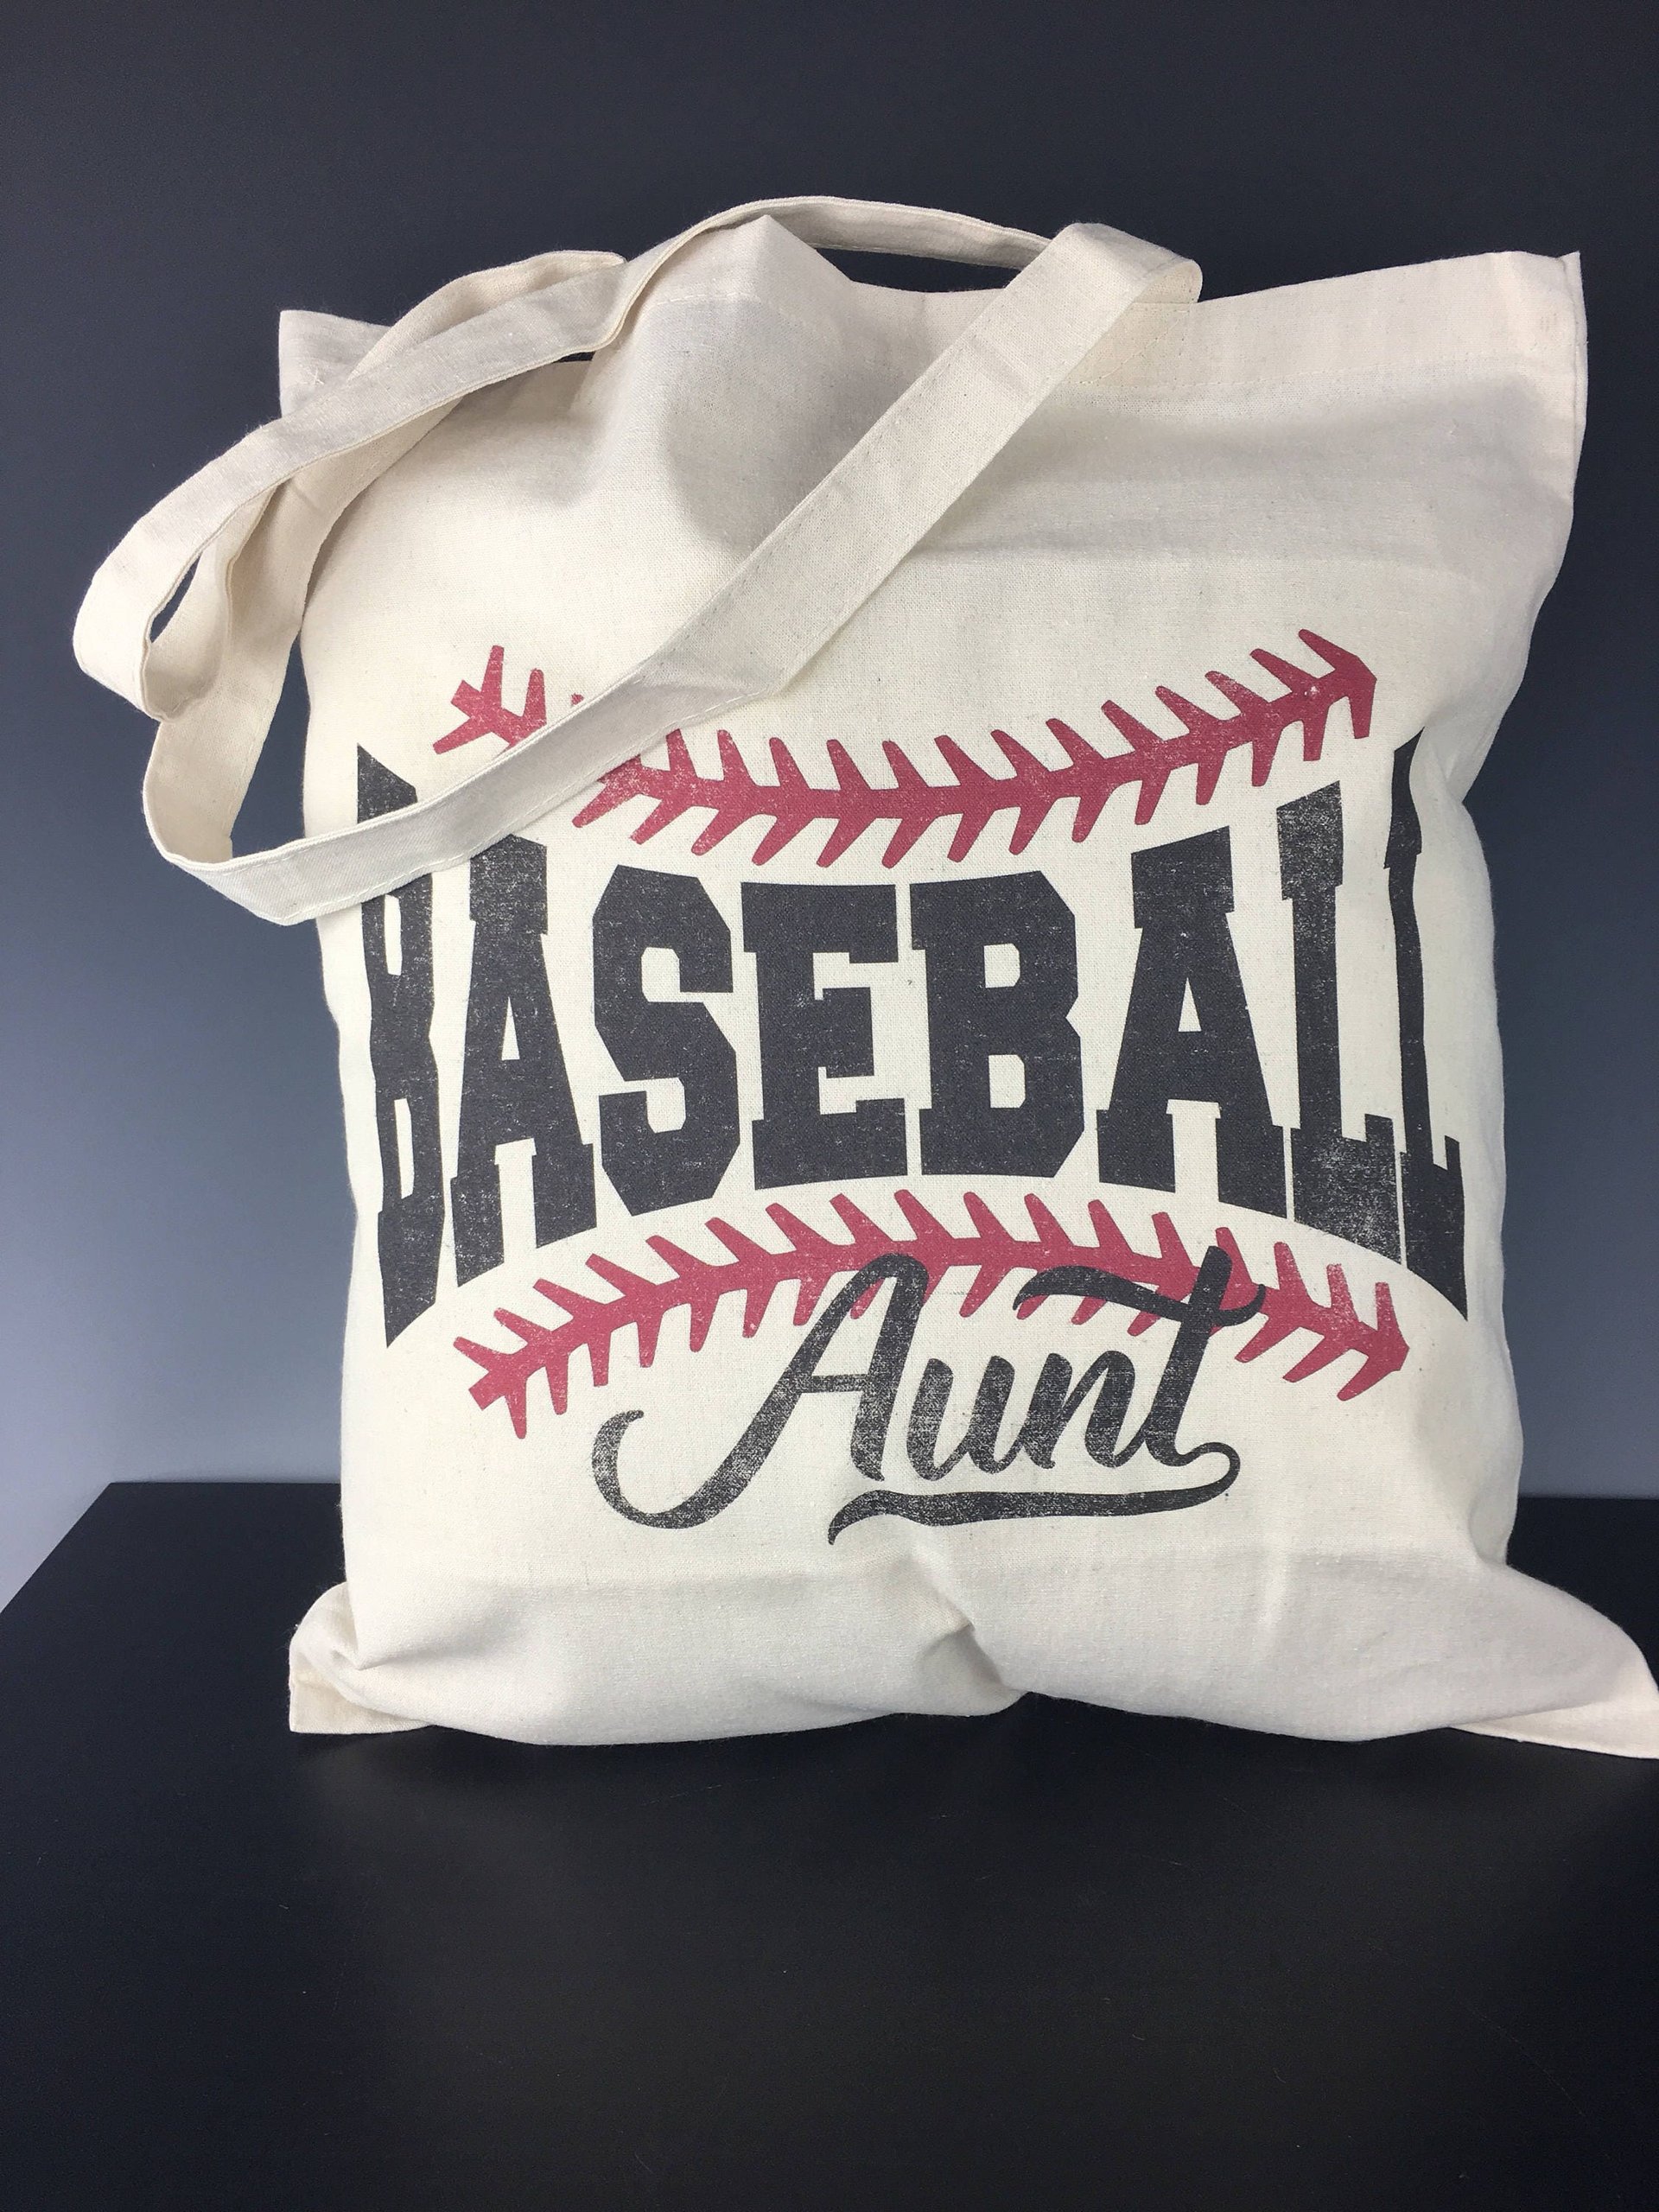 Baseball Mom, Aunt, Grandma, Nana, Meme, Mimi Sister, Dad, Uncle, Grandpa, Brother (or other Relation/Text) distressed Tote Bag